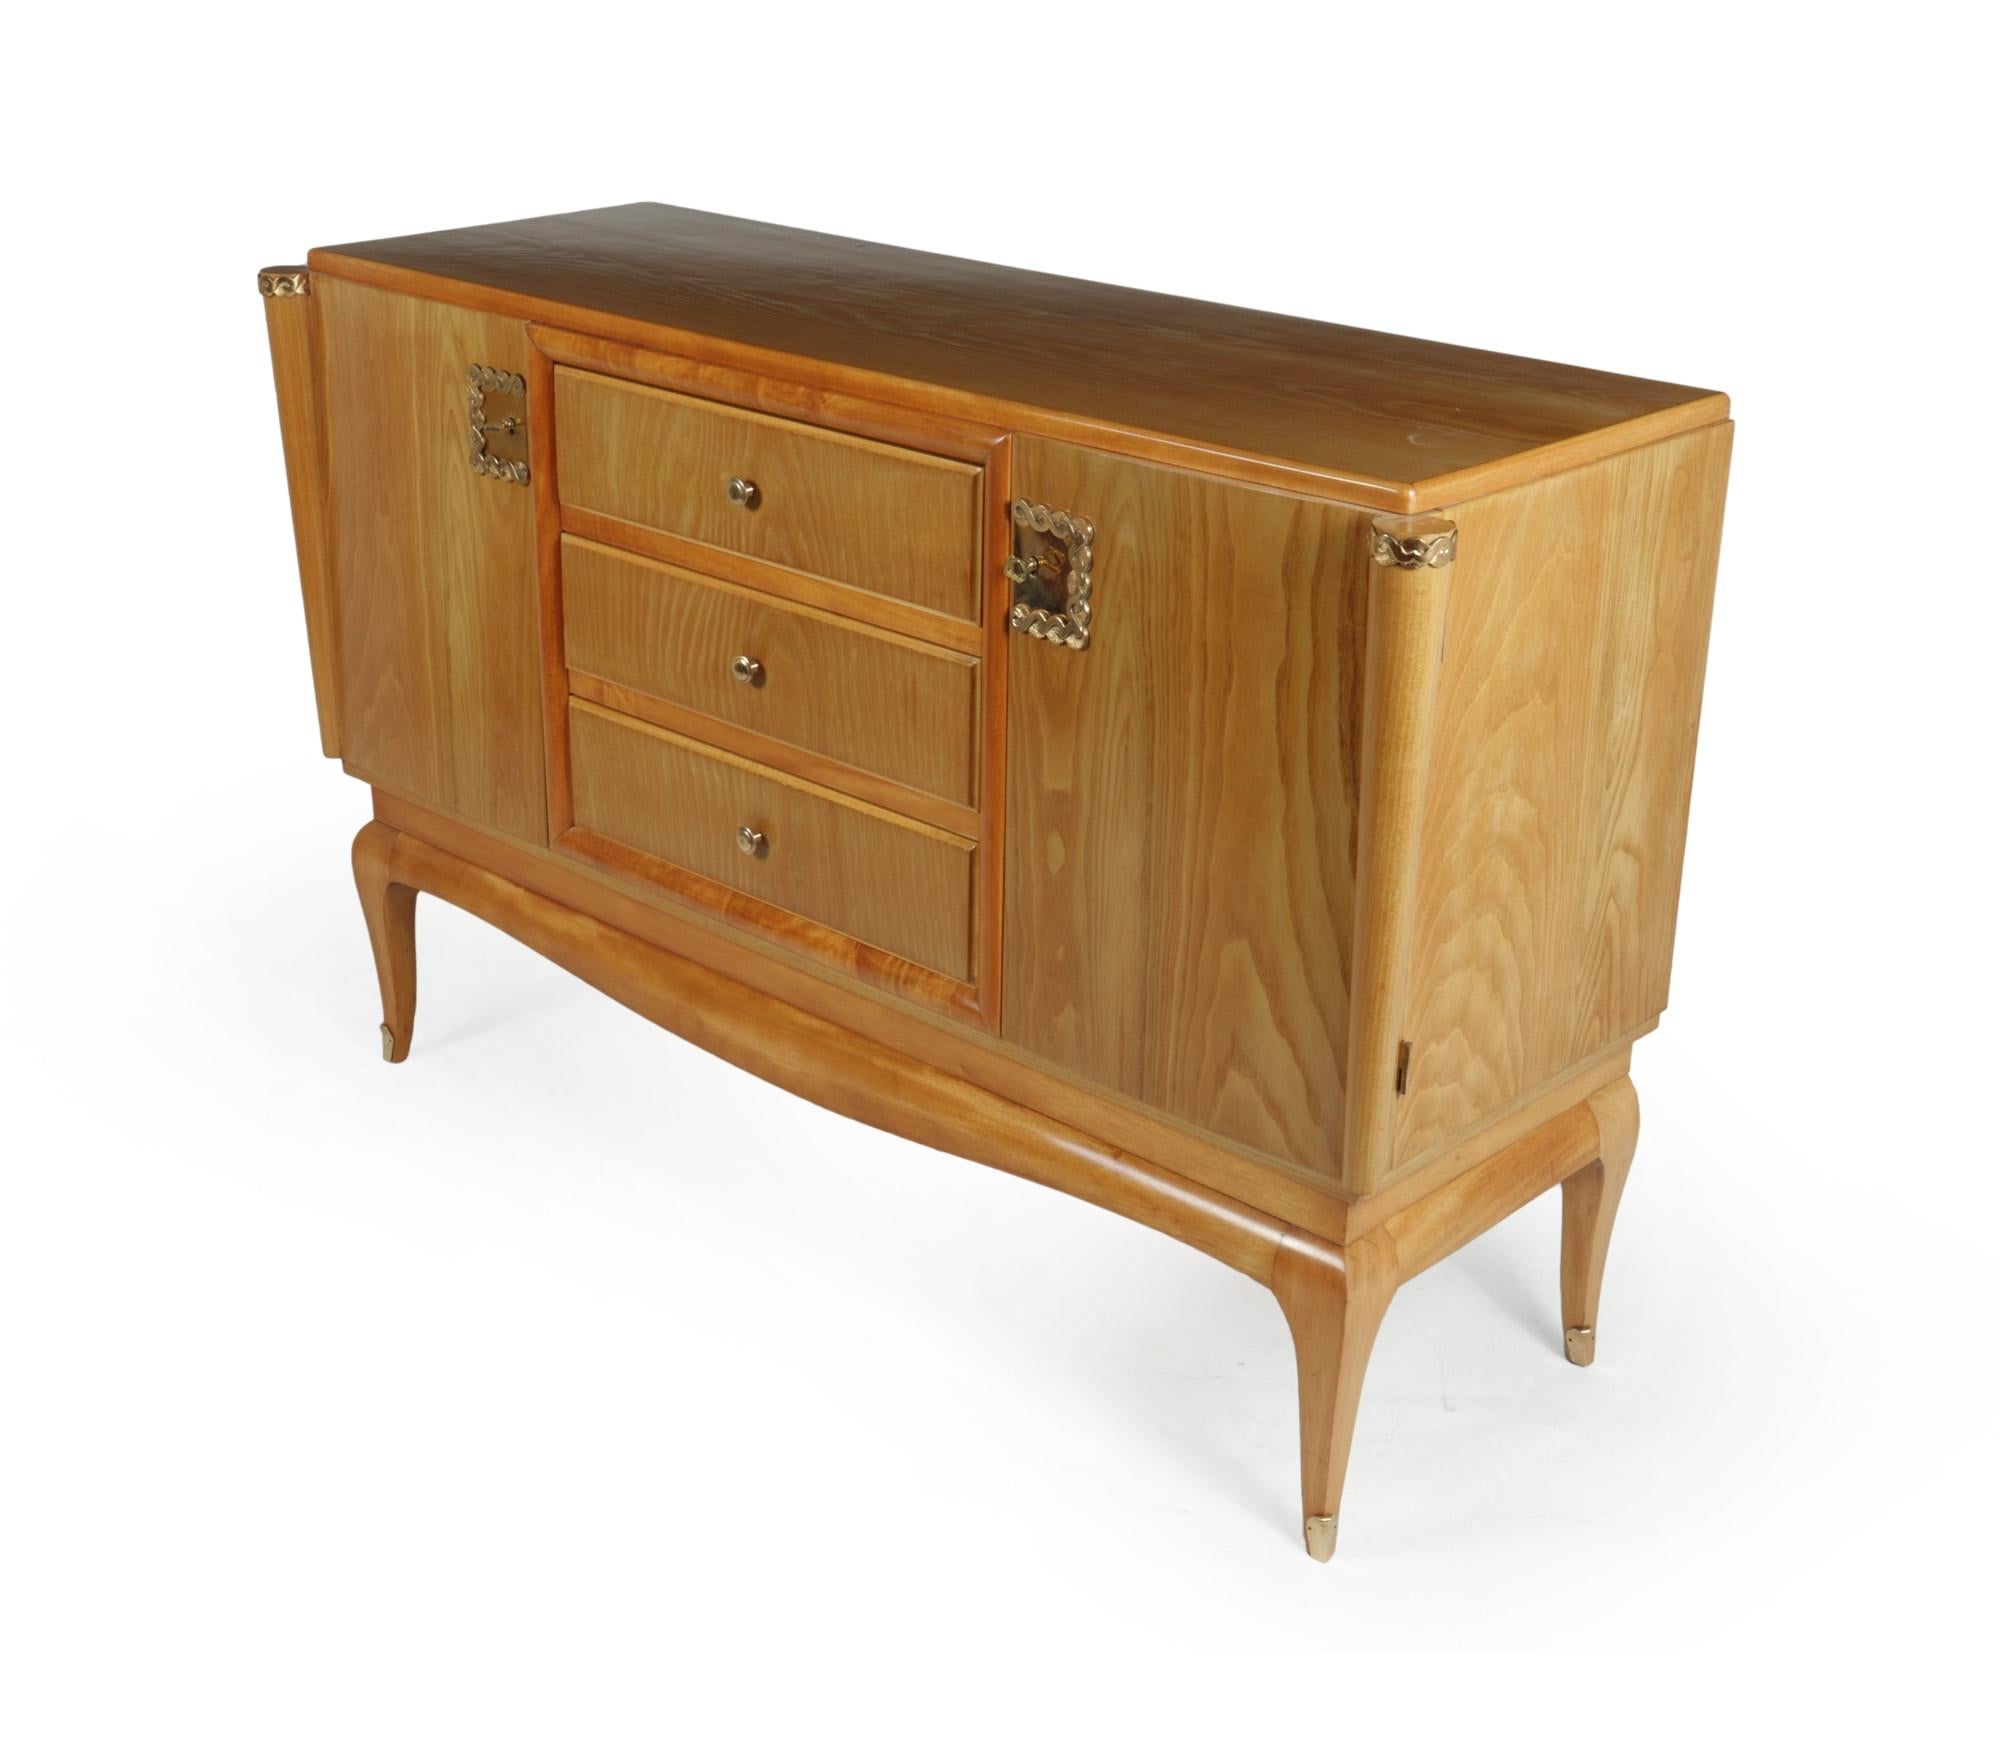 A French produced Art Deco sideboard wit ha central run of drawers and cupboards either side the and standing on a shaped base and saber leg the sideboard is covered in coated brass that has some light scratches, both doors are lockable and has two